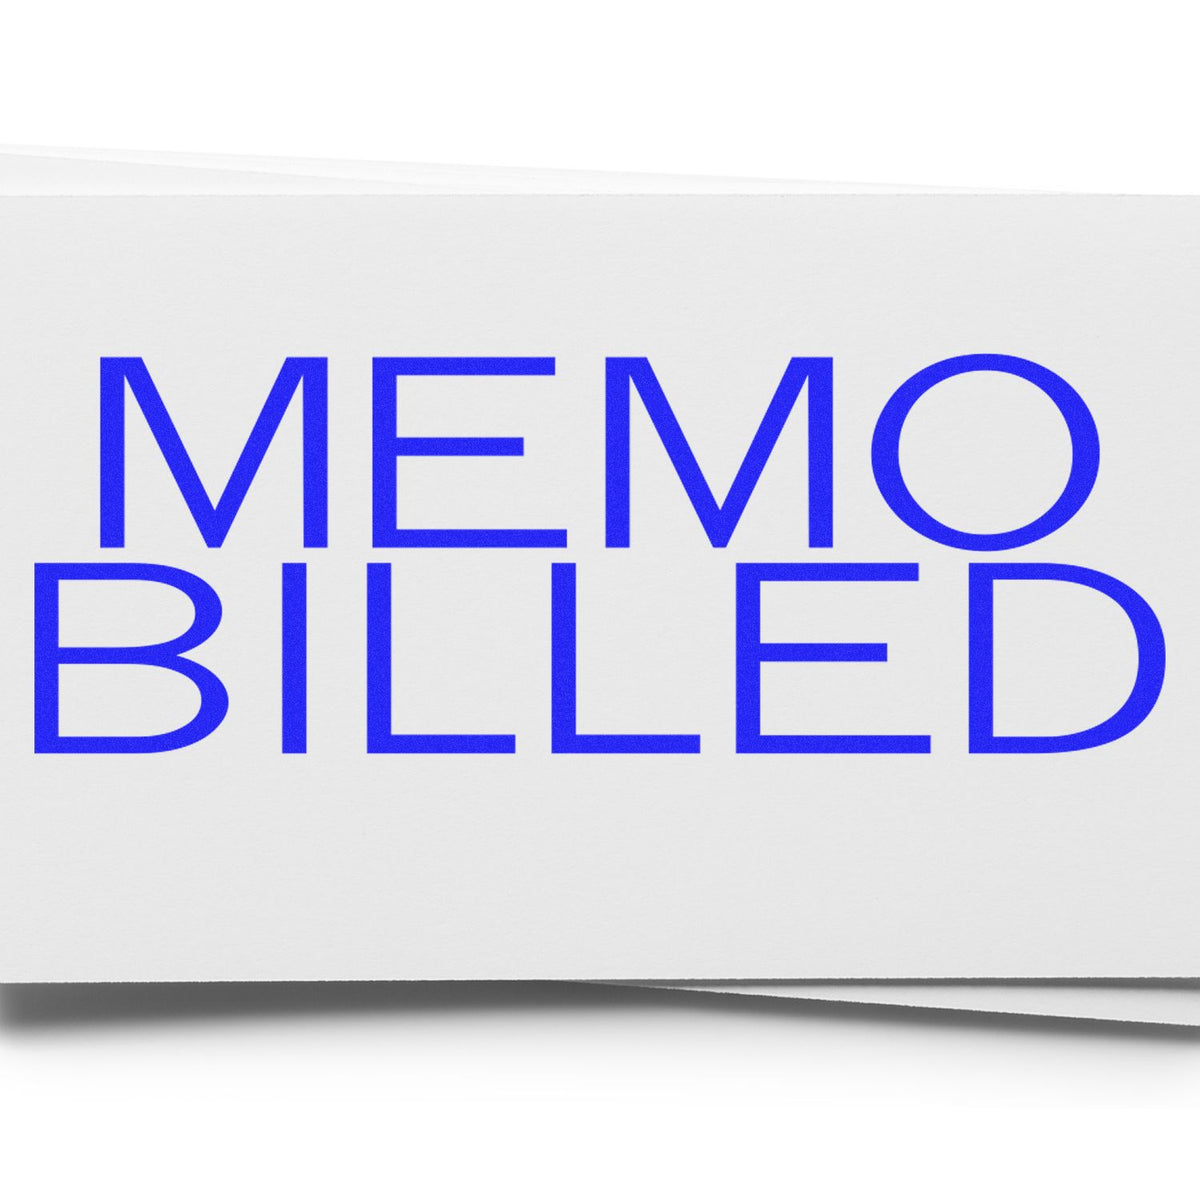 Memo Billed Rubber Stamp In Use Photo